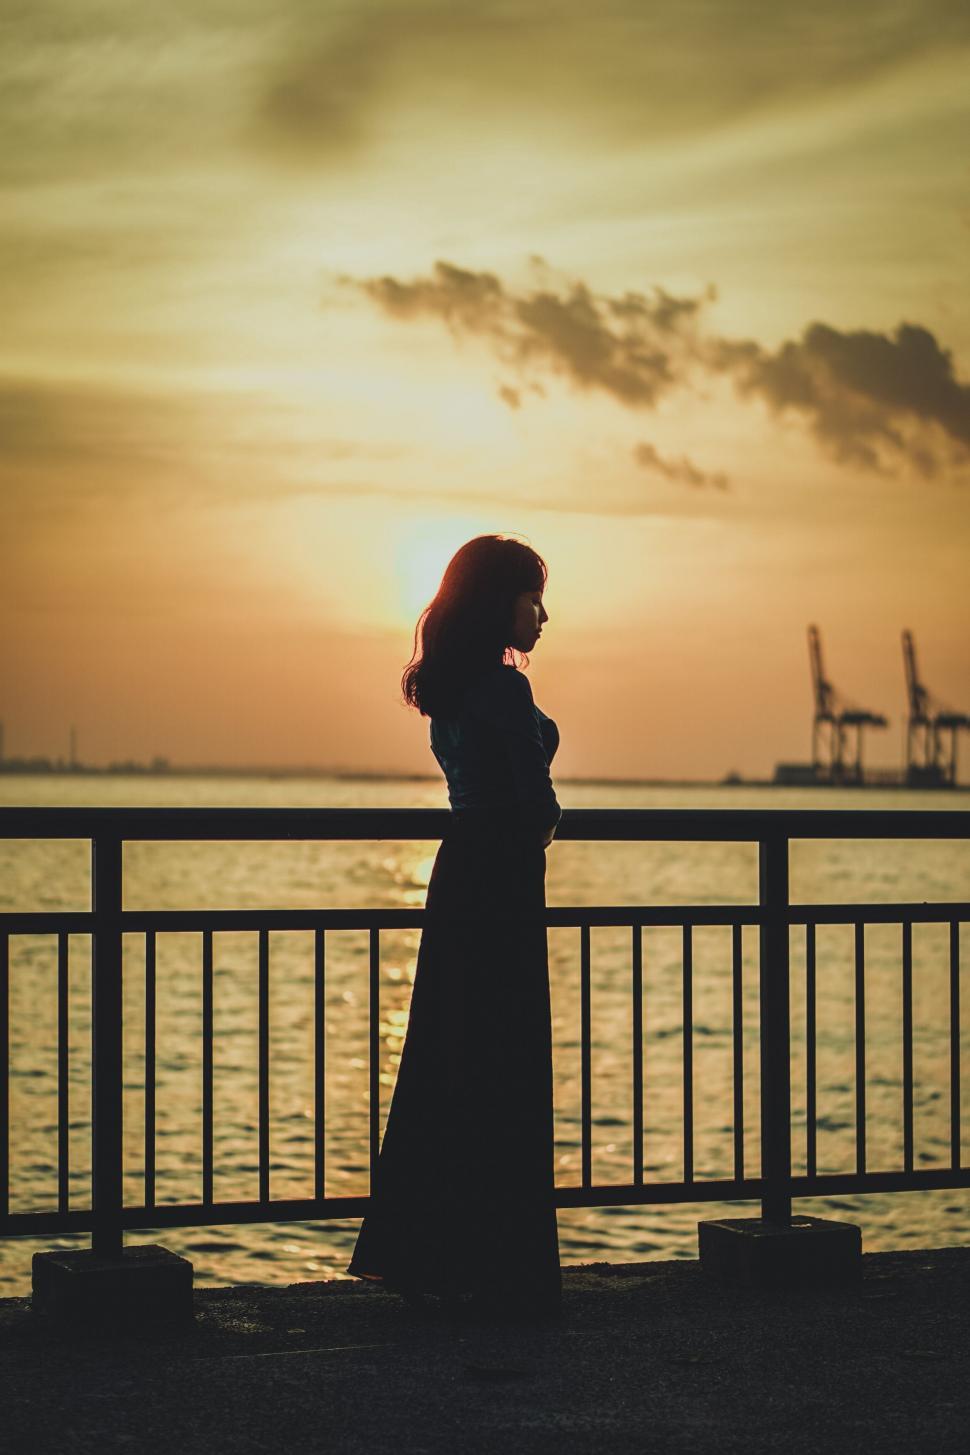 Free Image of A woman standing by a railing with a sunset in the background 